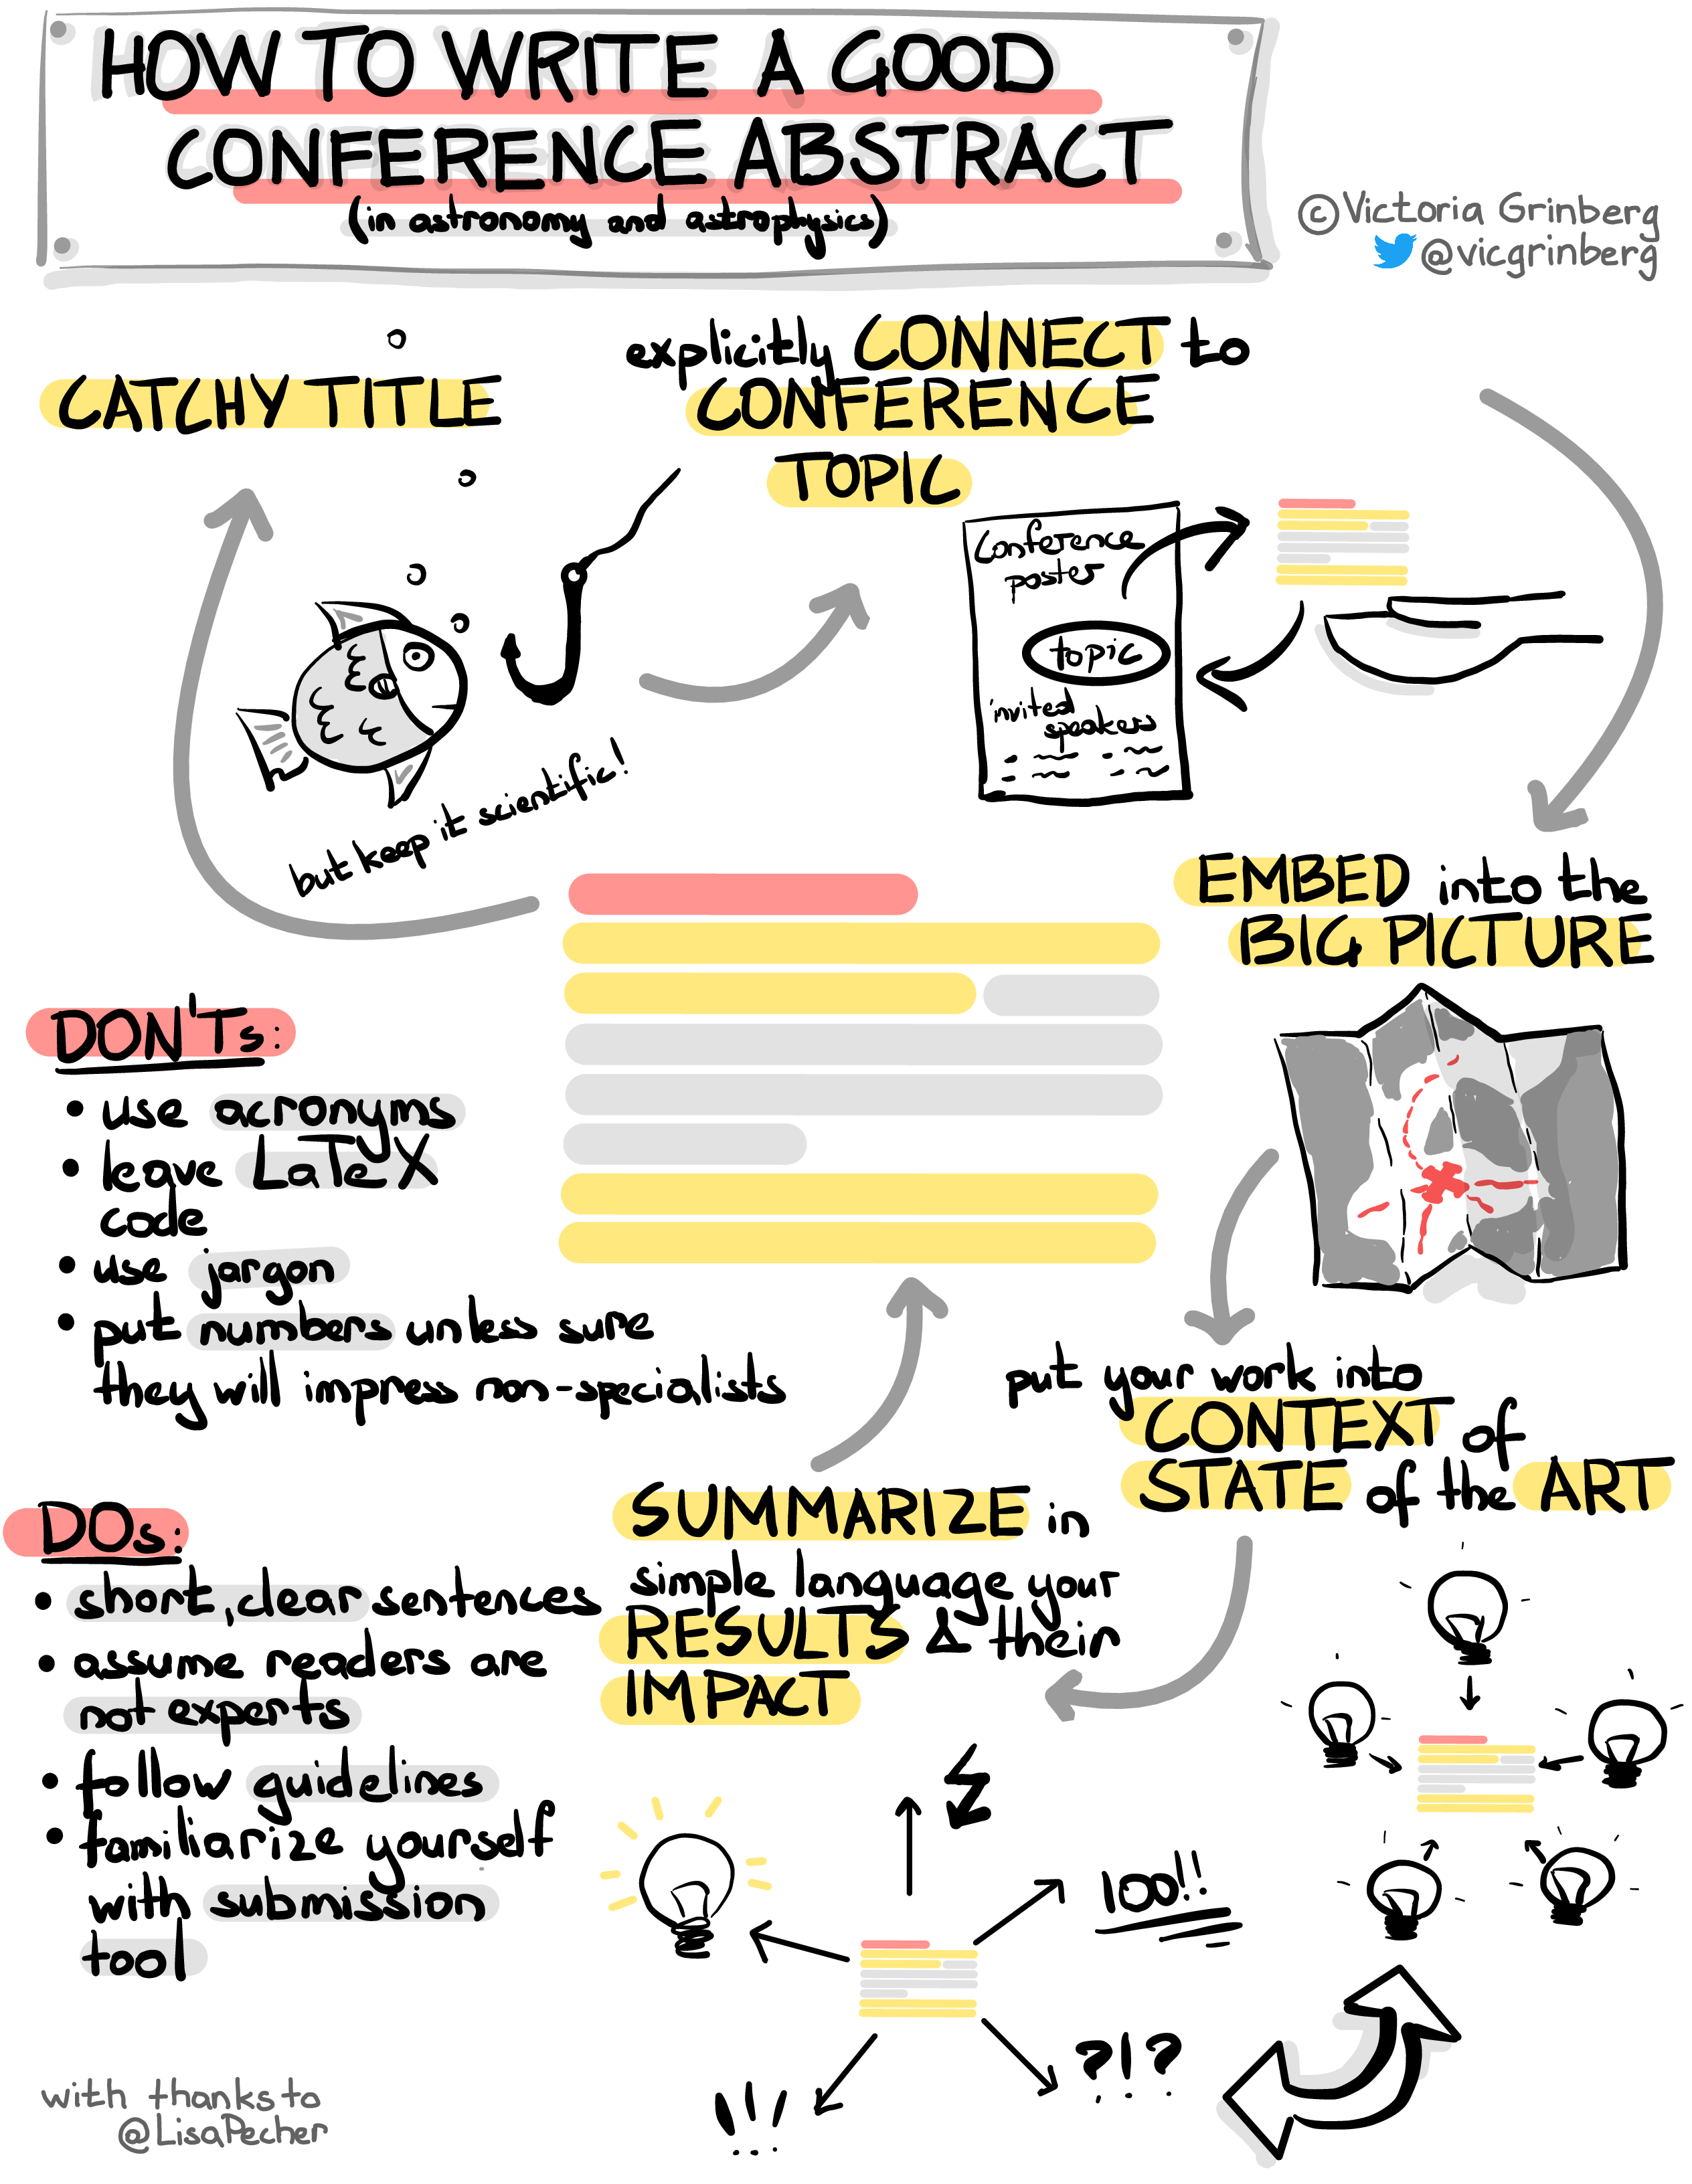 Sketchnote (lots of Text + some doodles)/Title: How to write a good conference abstract. In the middle a stylized abstract (lines in colors) around it doodles and sentences connected by arrows: Catchy title (but keep it scientific), arrow, explicitly connect to conference topics, arrow, embed into the big picture, arrow, put your work into context of state of state of the art, arrow, summarize in simple language your results & their impact. Two lists of don'ts and dos: Don'ts: use acronyms; leave LaTeX code; use jargon; put number unless sure they will impress non-specialists. Dos: short, clear sentence; assume readers are not experts; follow guidelines; familiarize yourself with submission tool